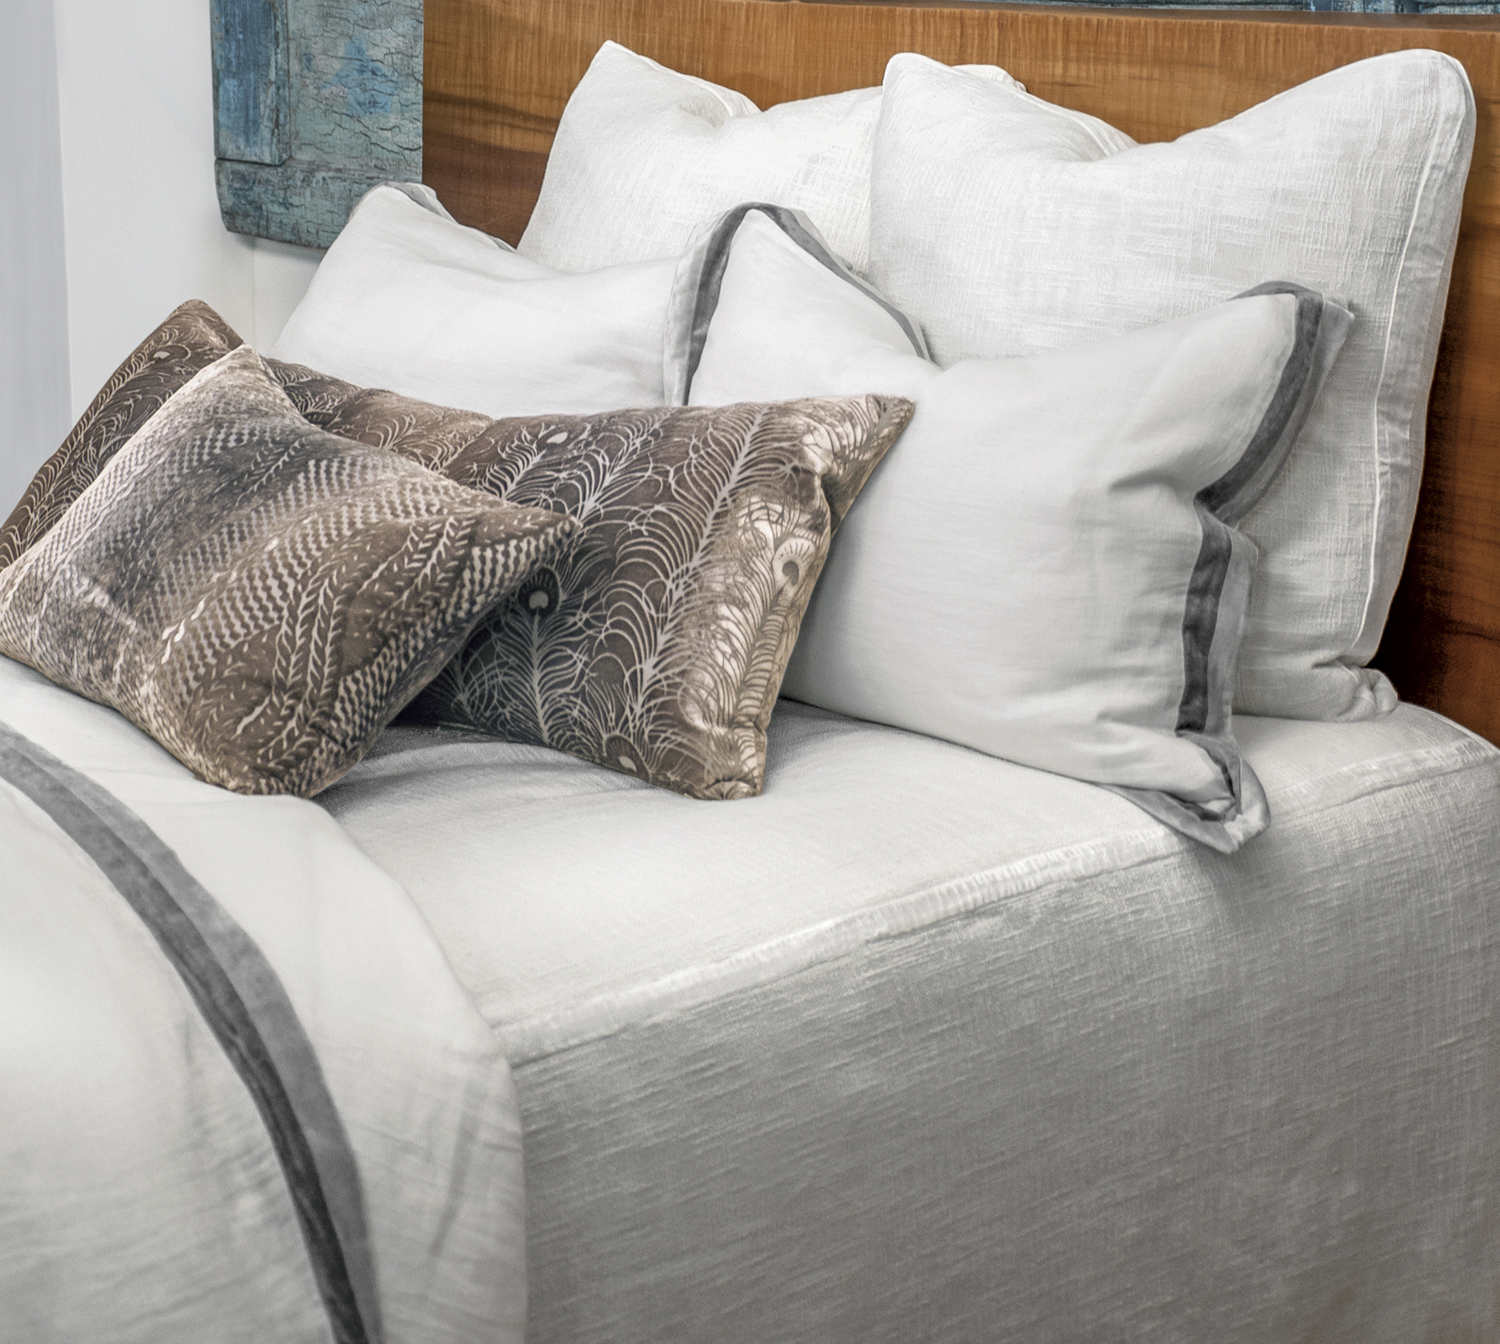 Kevin OBrien Studio Chunky Weave Cotton Bedding